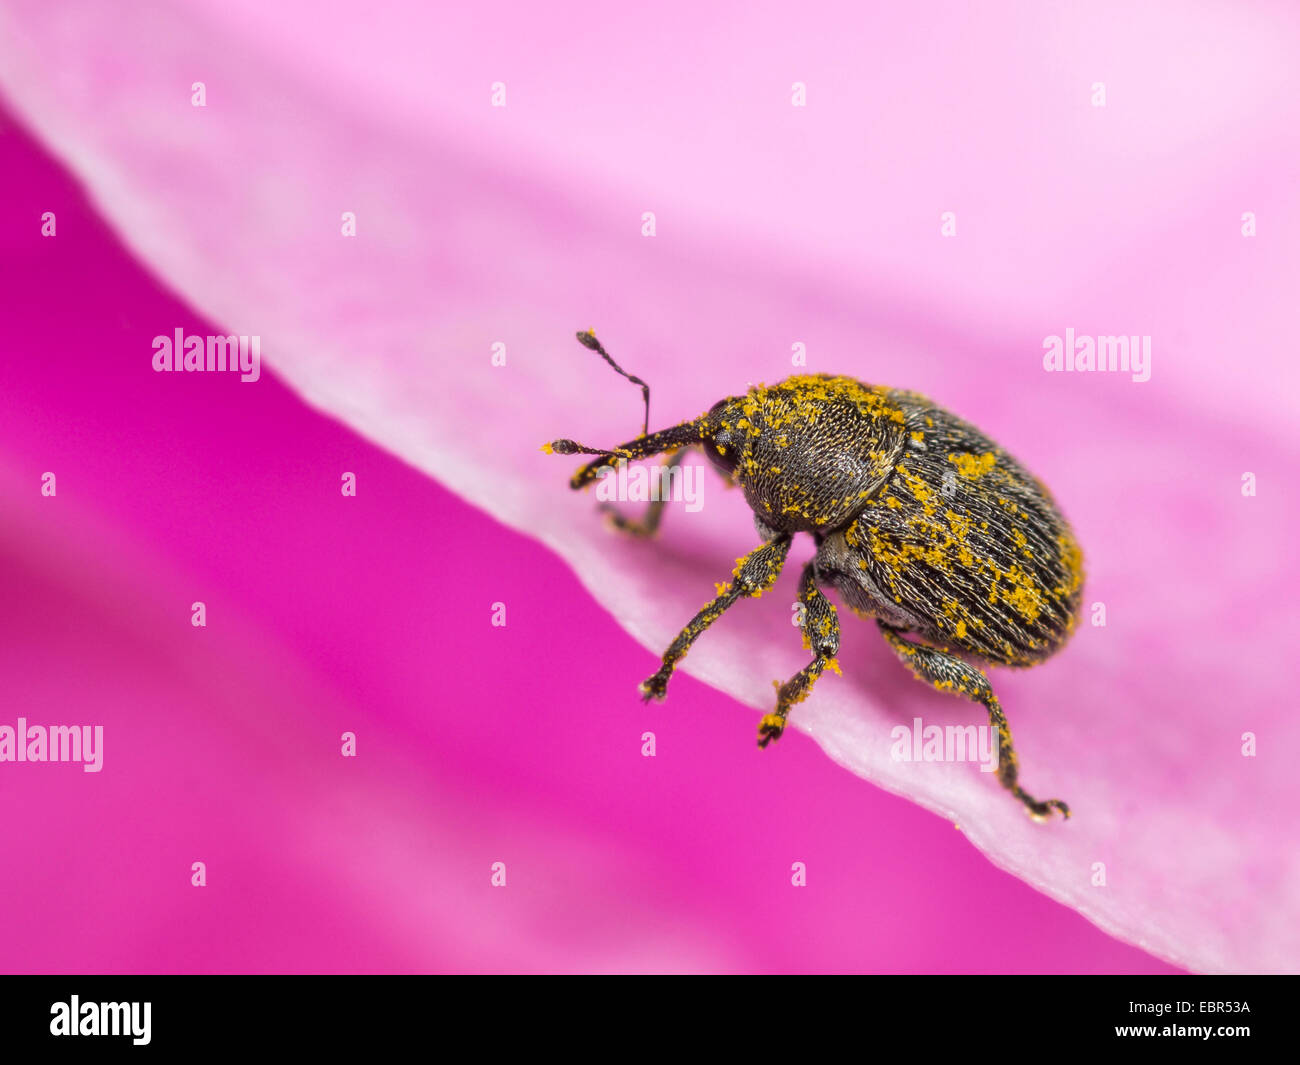 Snout beetle (Mecinus spec.), with pollen on a rose flower, Germany Stock Photo